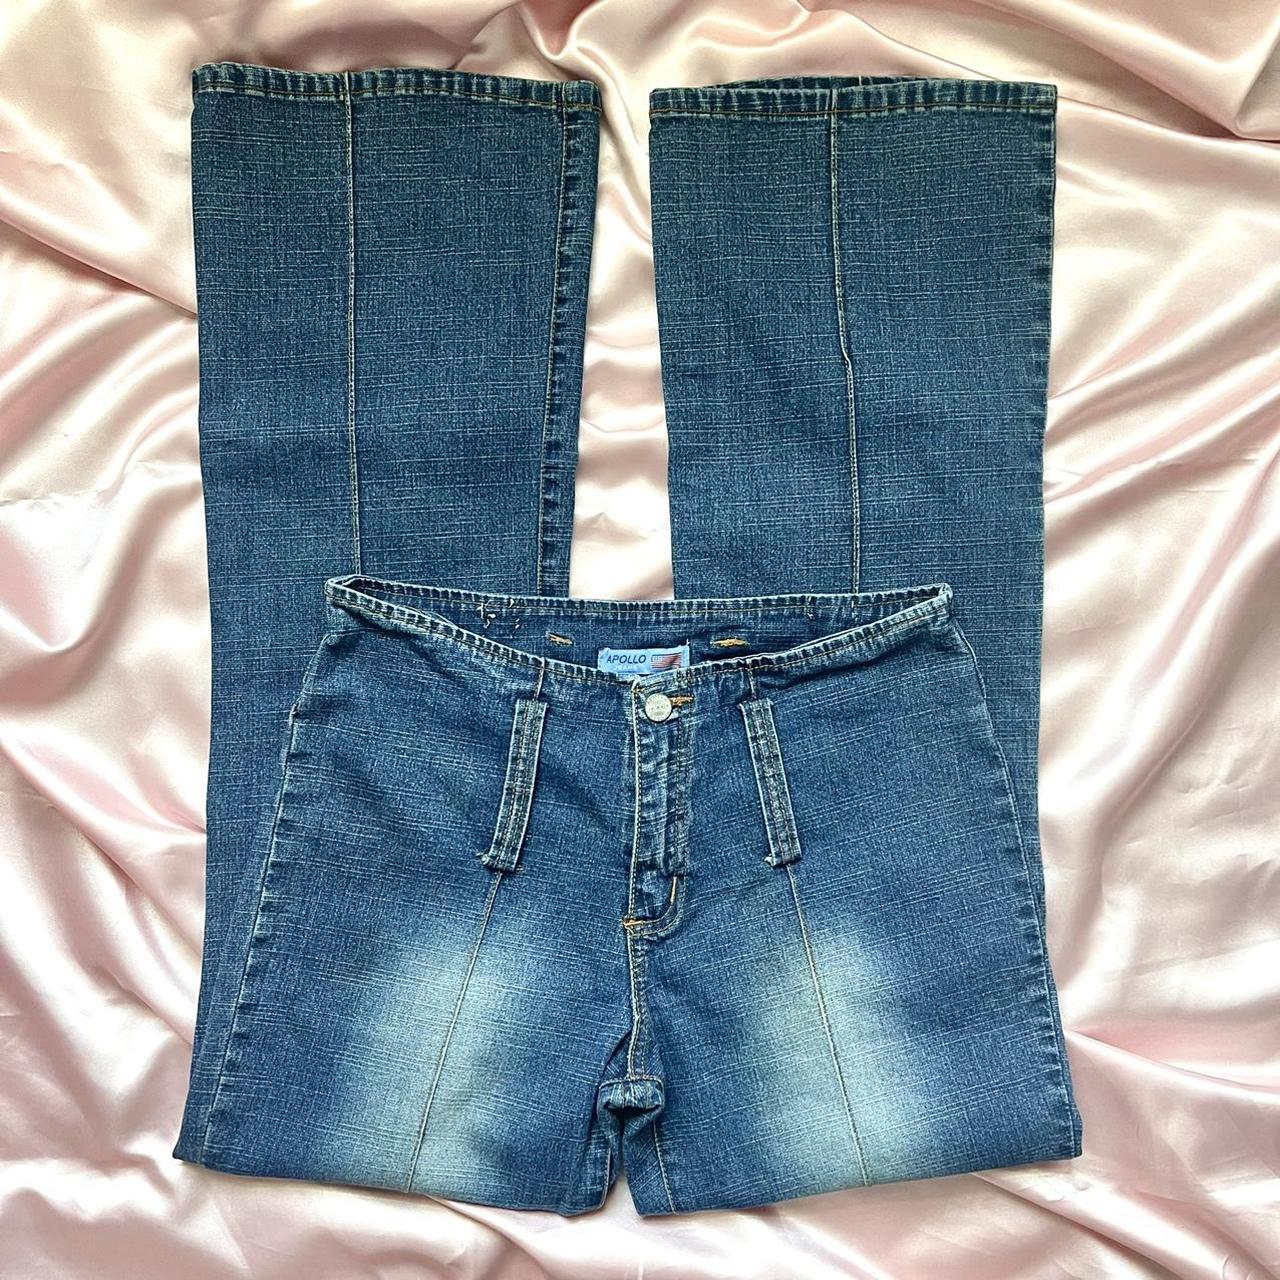 Y2K Apollo Jeans - Adorable pleated jeans with a... - Depop